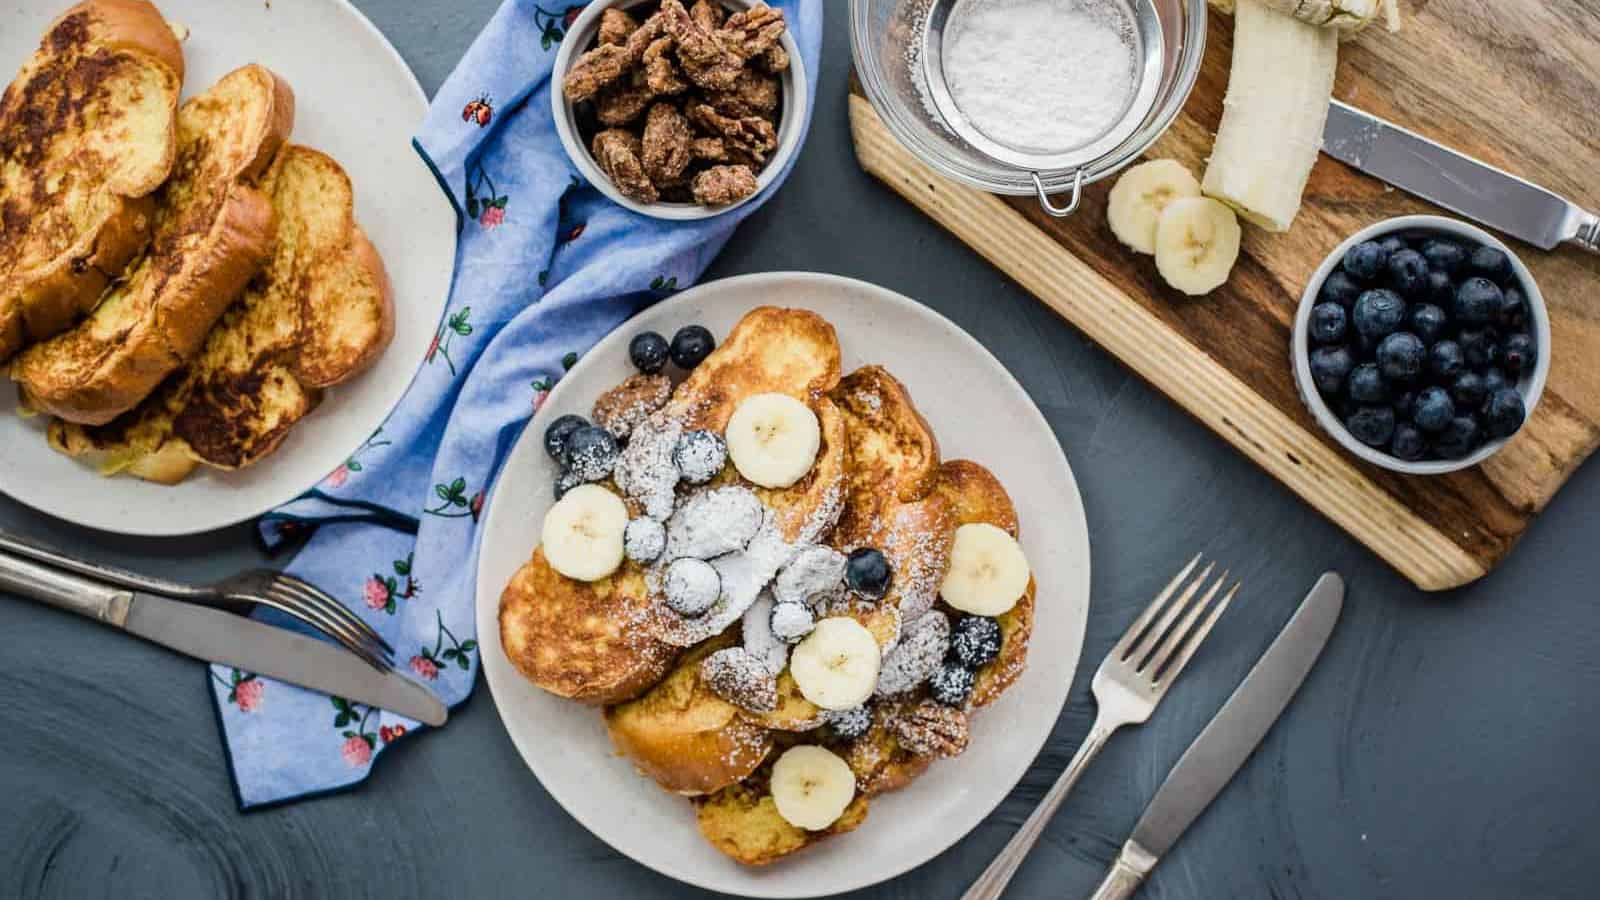 Say Goodbye to Boring Breakfast with 15 Easy Brunch Recipes